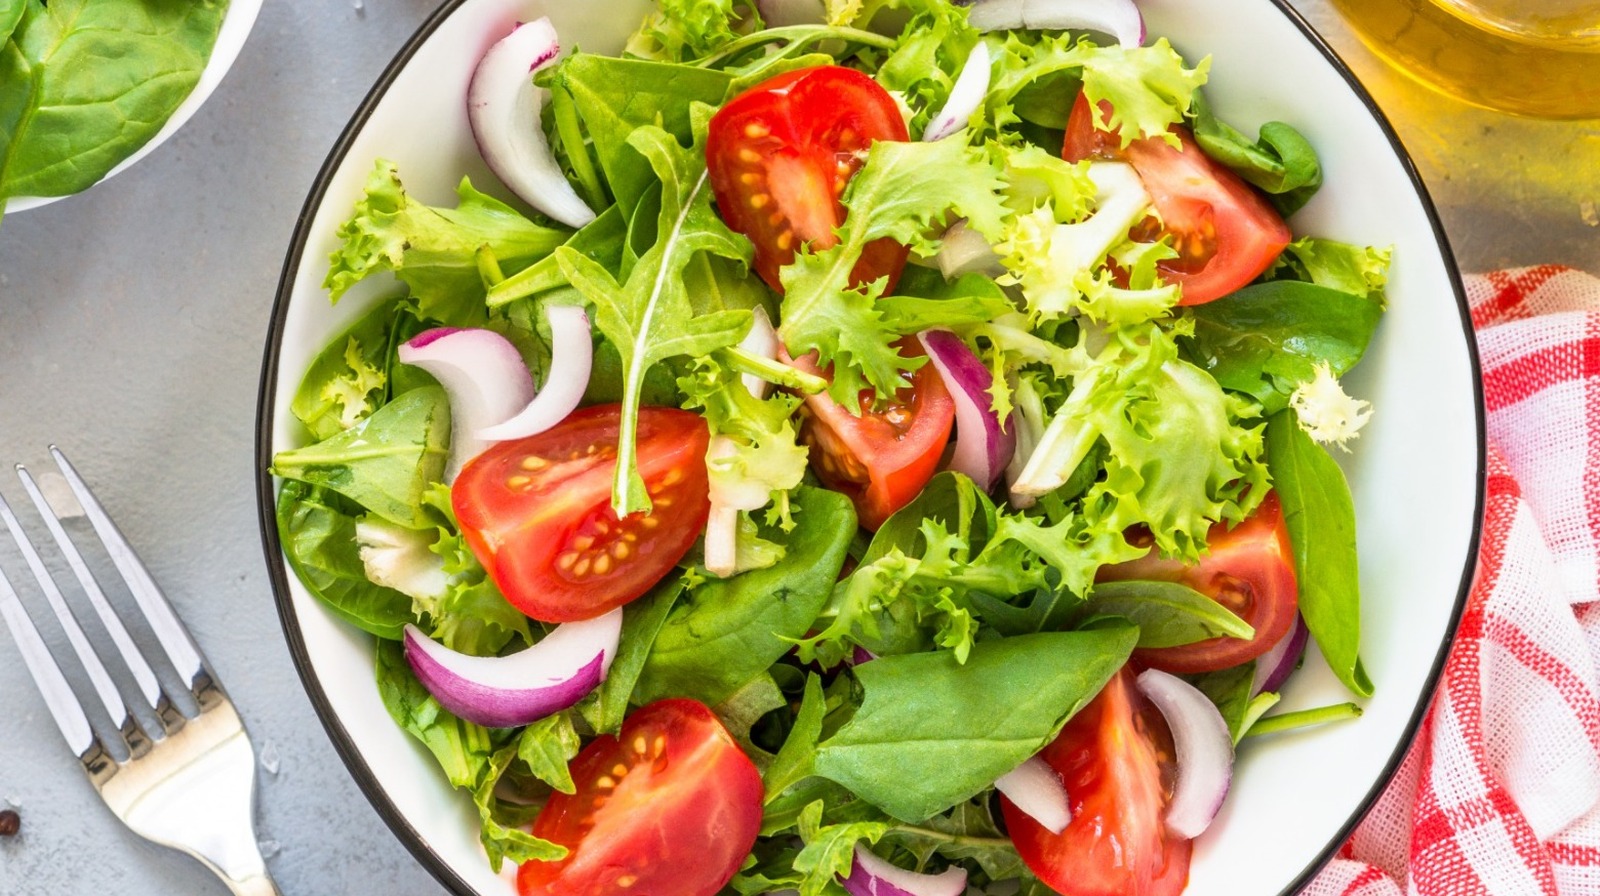 15 Things You Should Be Putting On Your Salad But Aren't